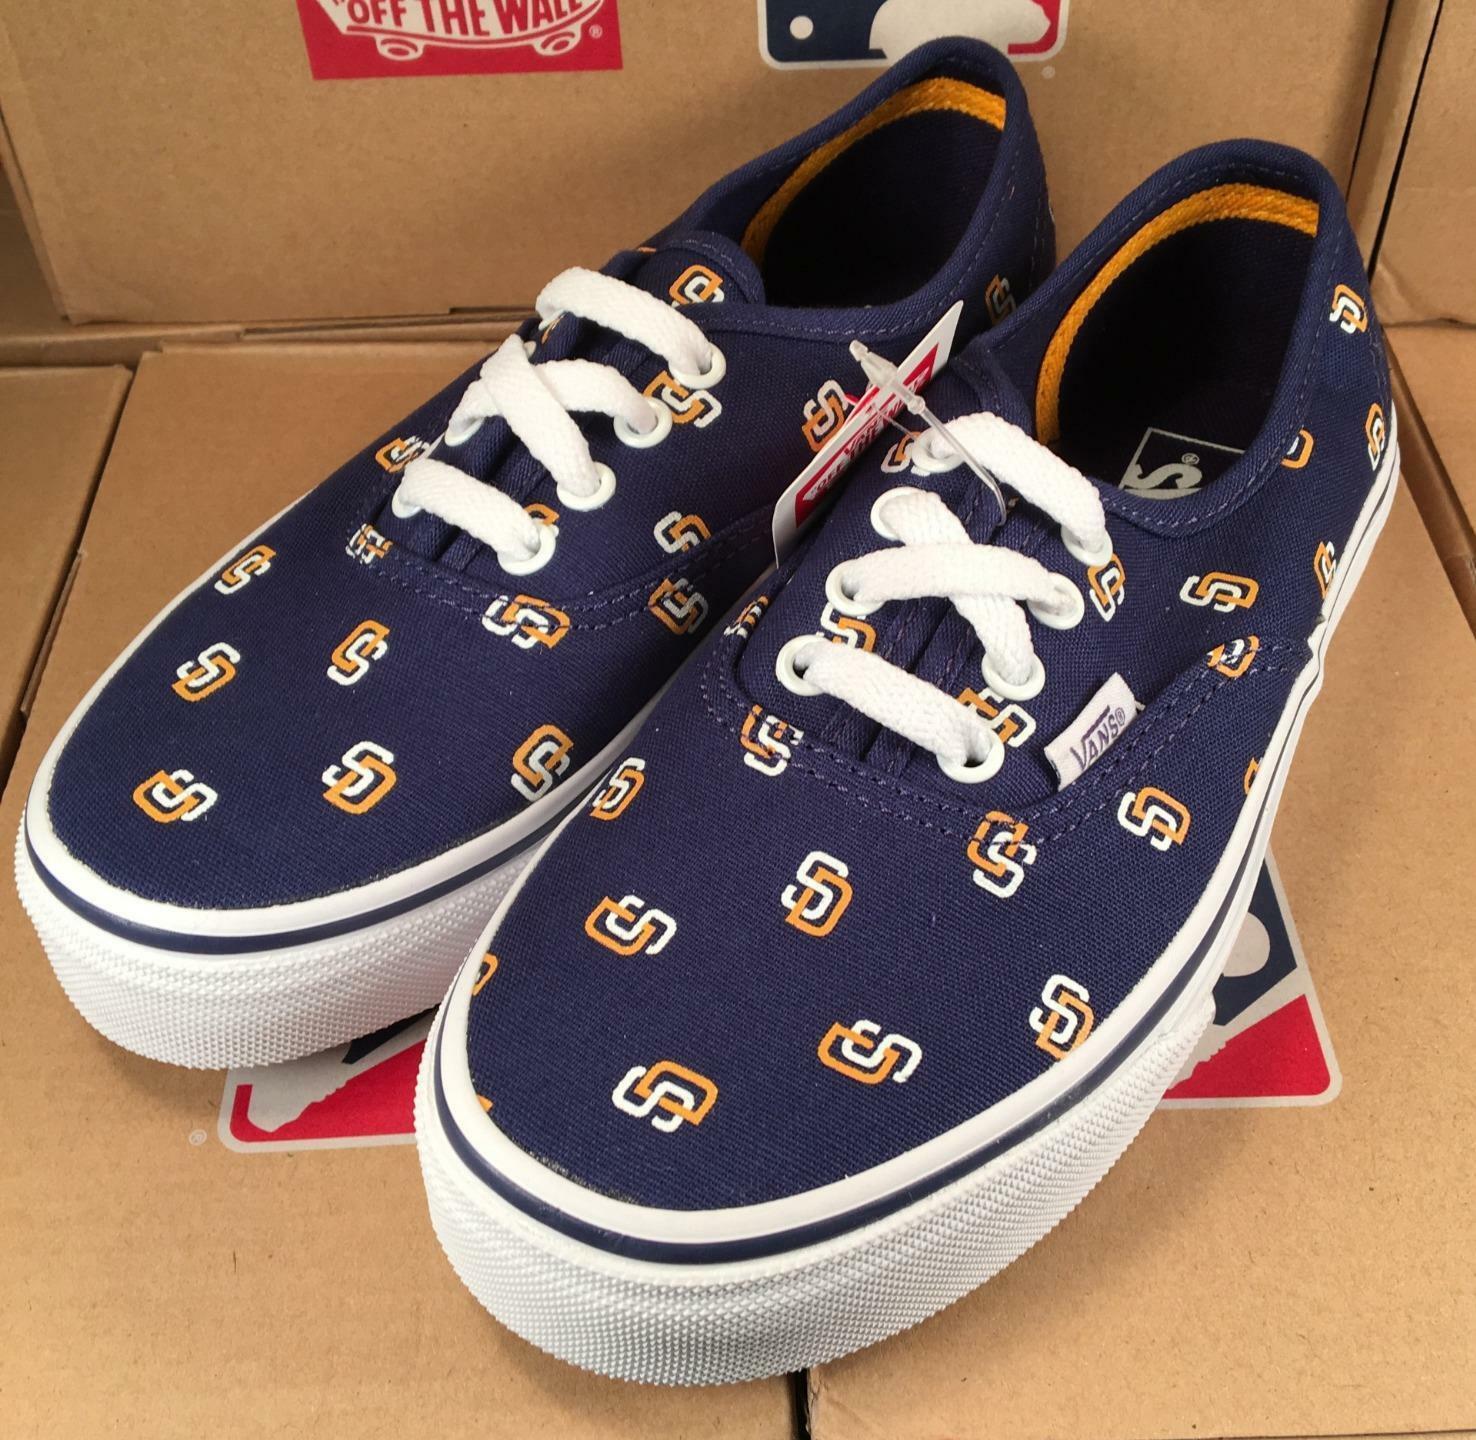 Vans KIDS San Diego Padres MLB Authentic Sneaker Limited Edition Shoes ...